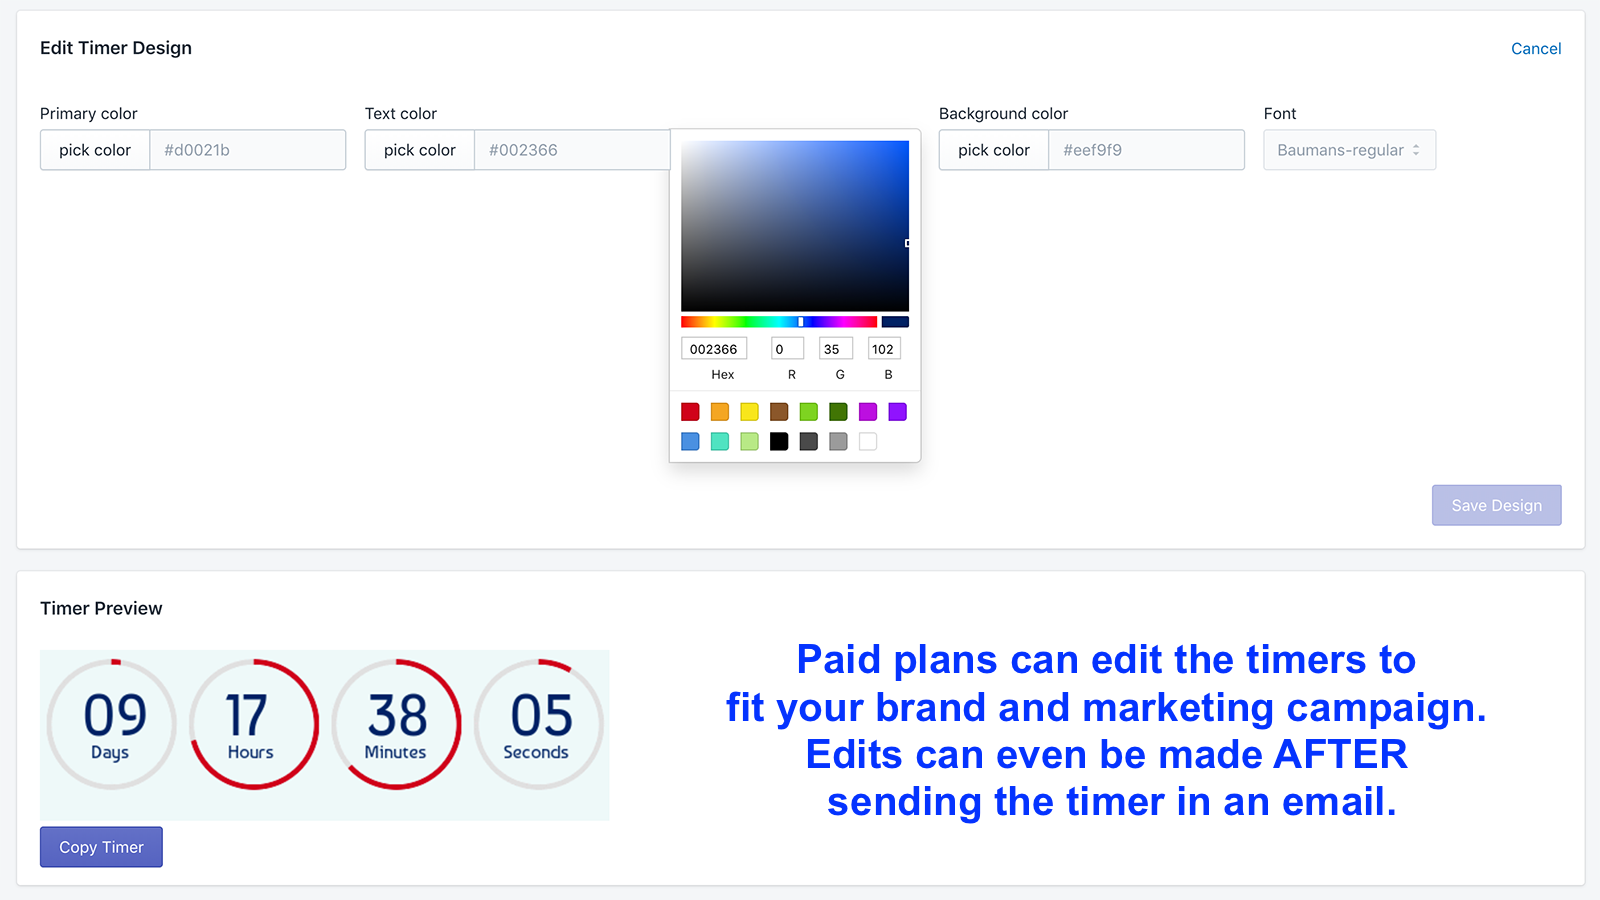 Edit the timer to fit your brand with a paid plan.